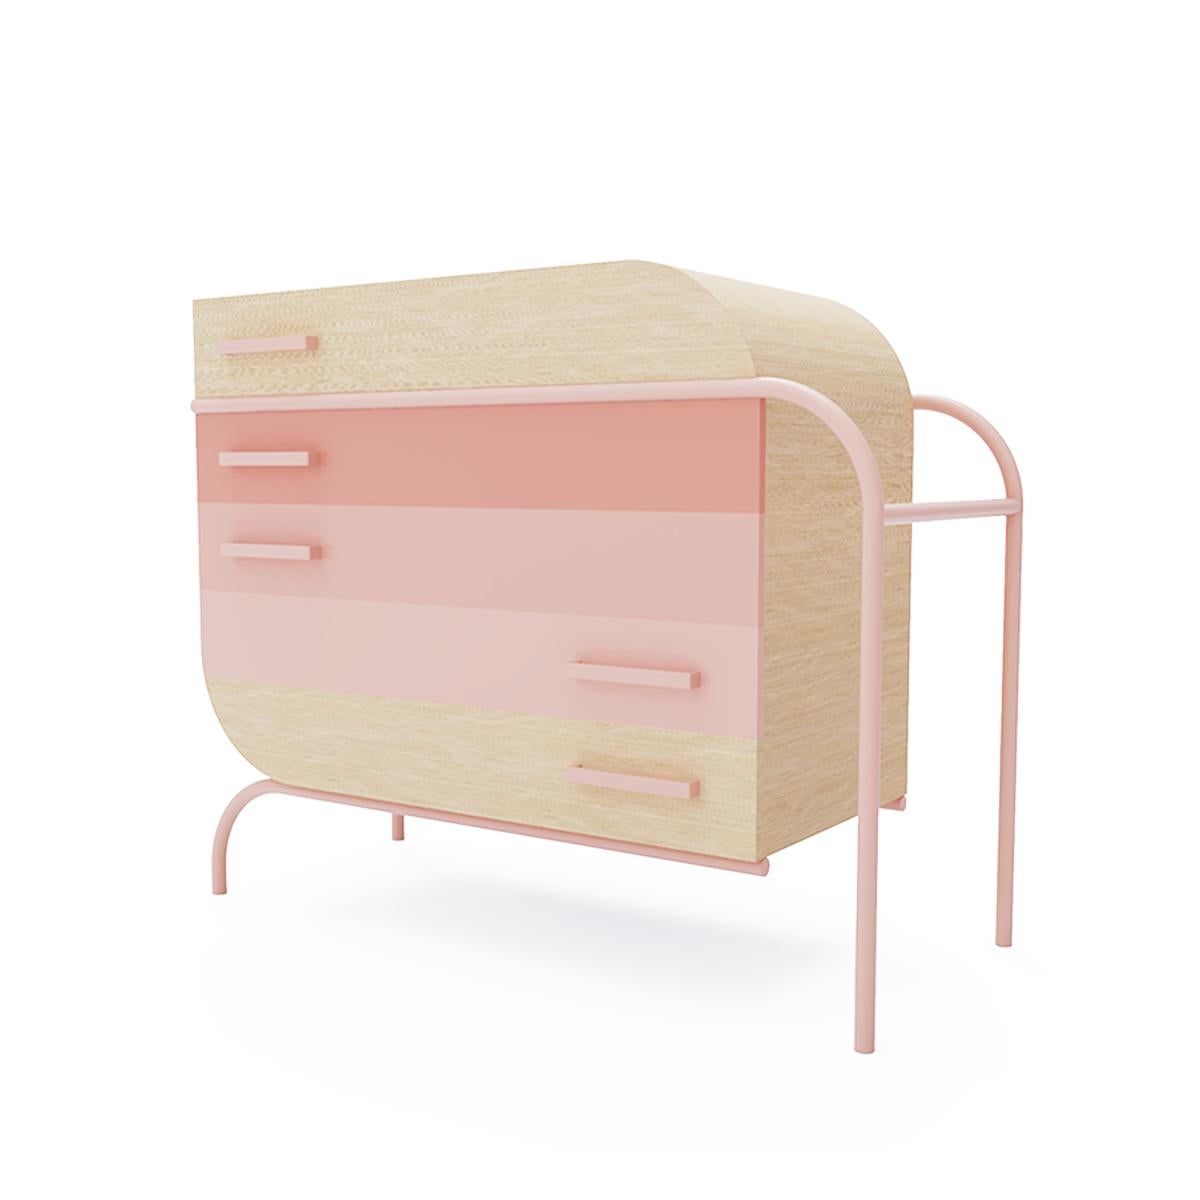 The staple of modern contemporary furniture, this wood credenza instantly enamors with its pastel colors and clean lines. Bold in appearance and functional in use, this showstopping piece of furniture gives storage a fresh new look!

Customizable in